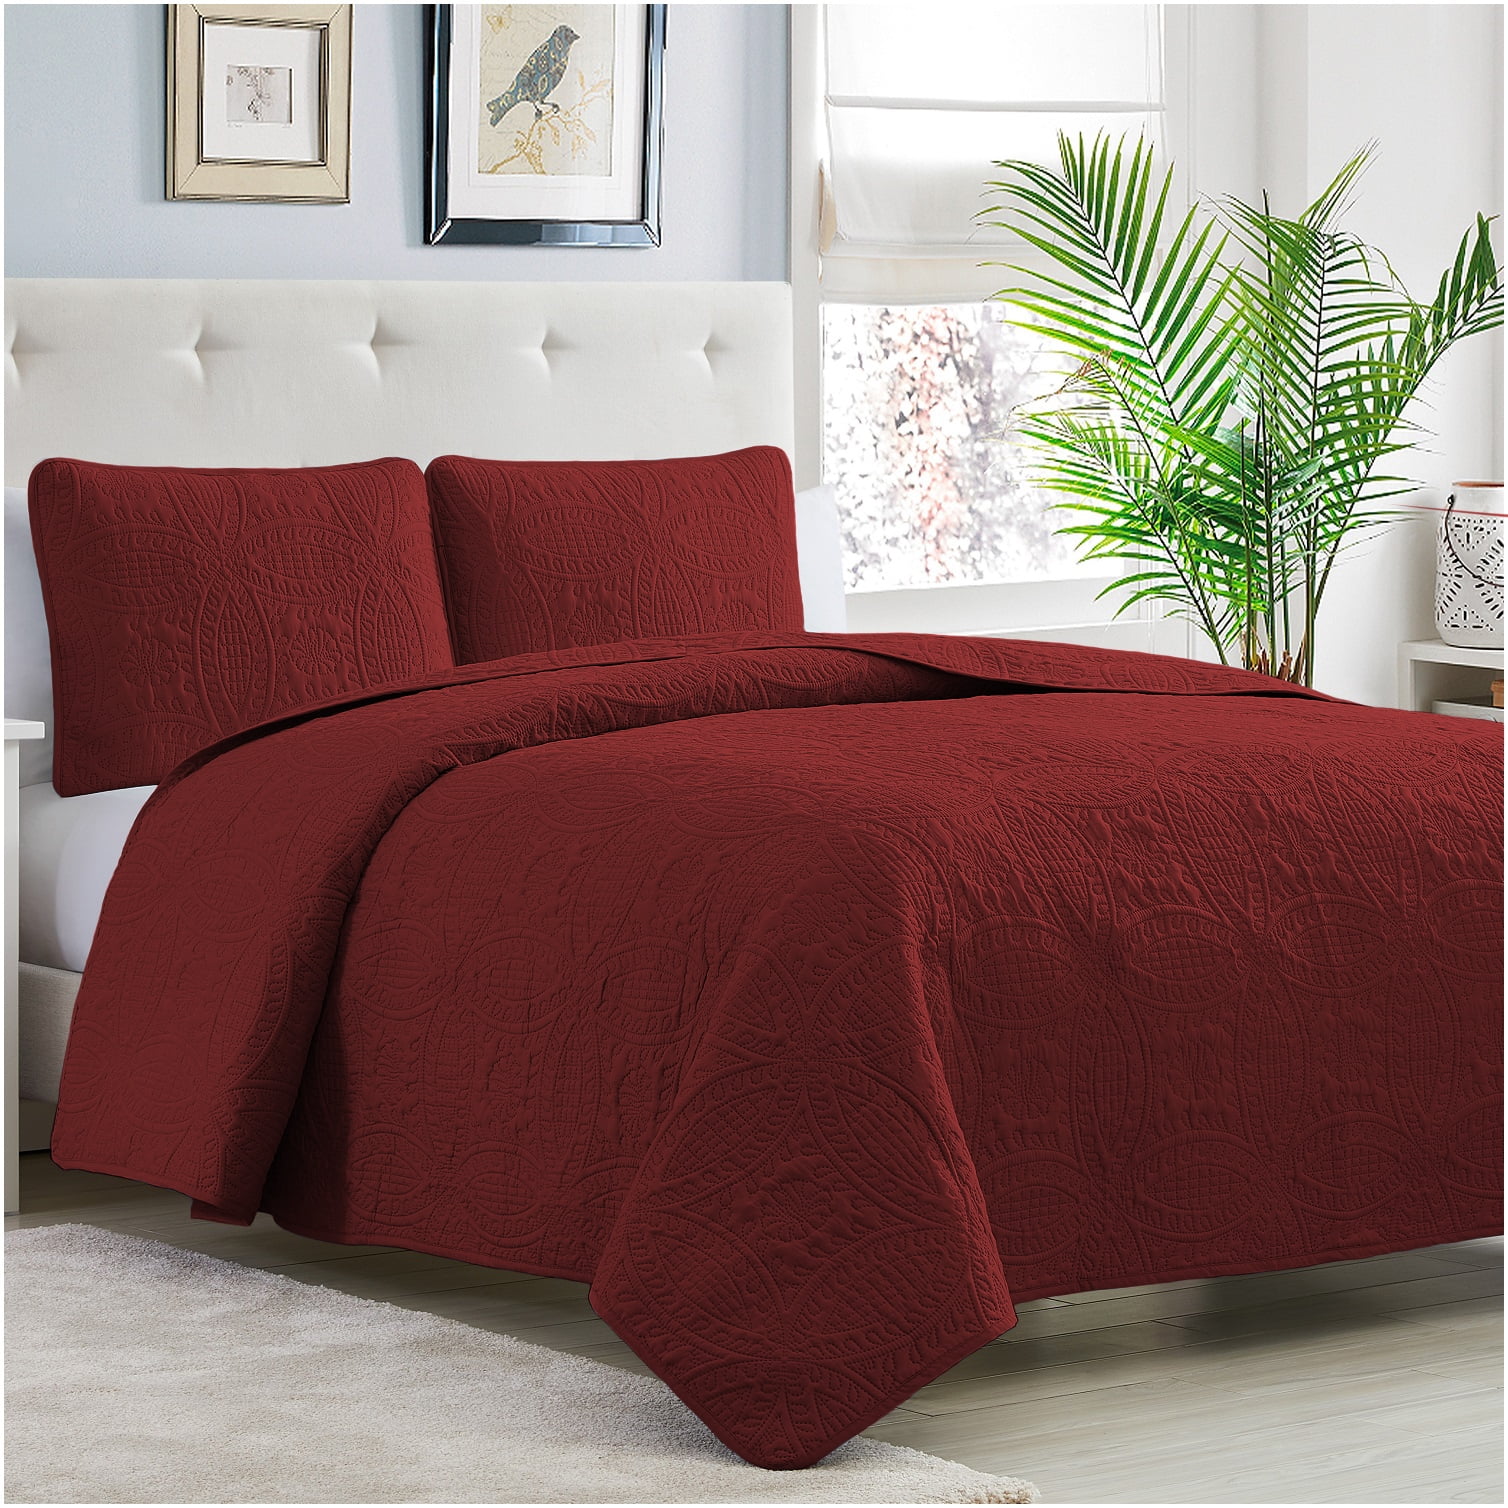 Details about   Cozy Bedding Sheet Set 4 PCs OR 6 PCs Organic Cotton Olympic Queen Solid Colors 